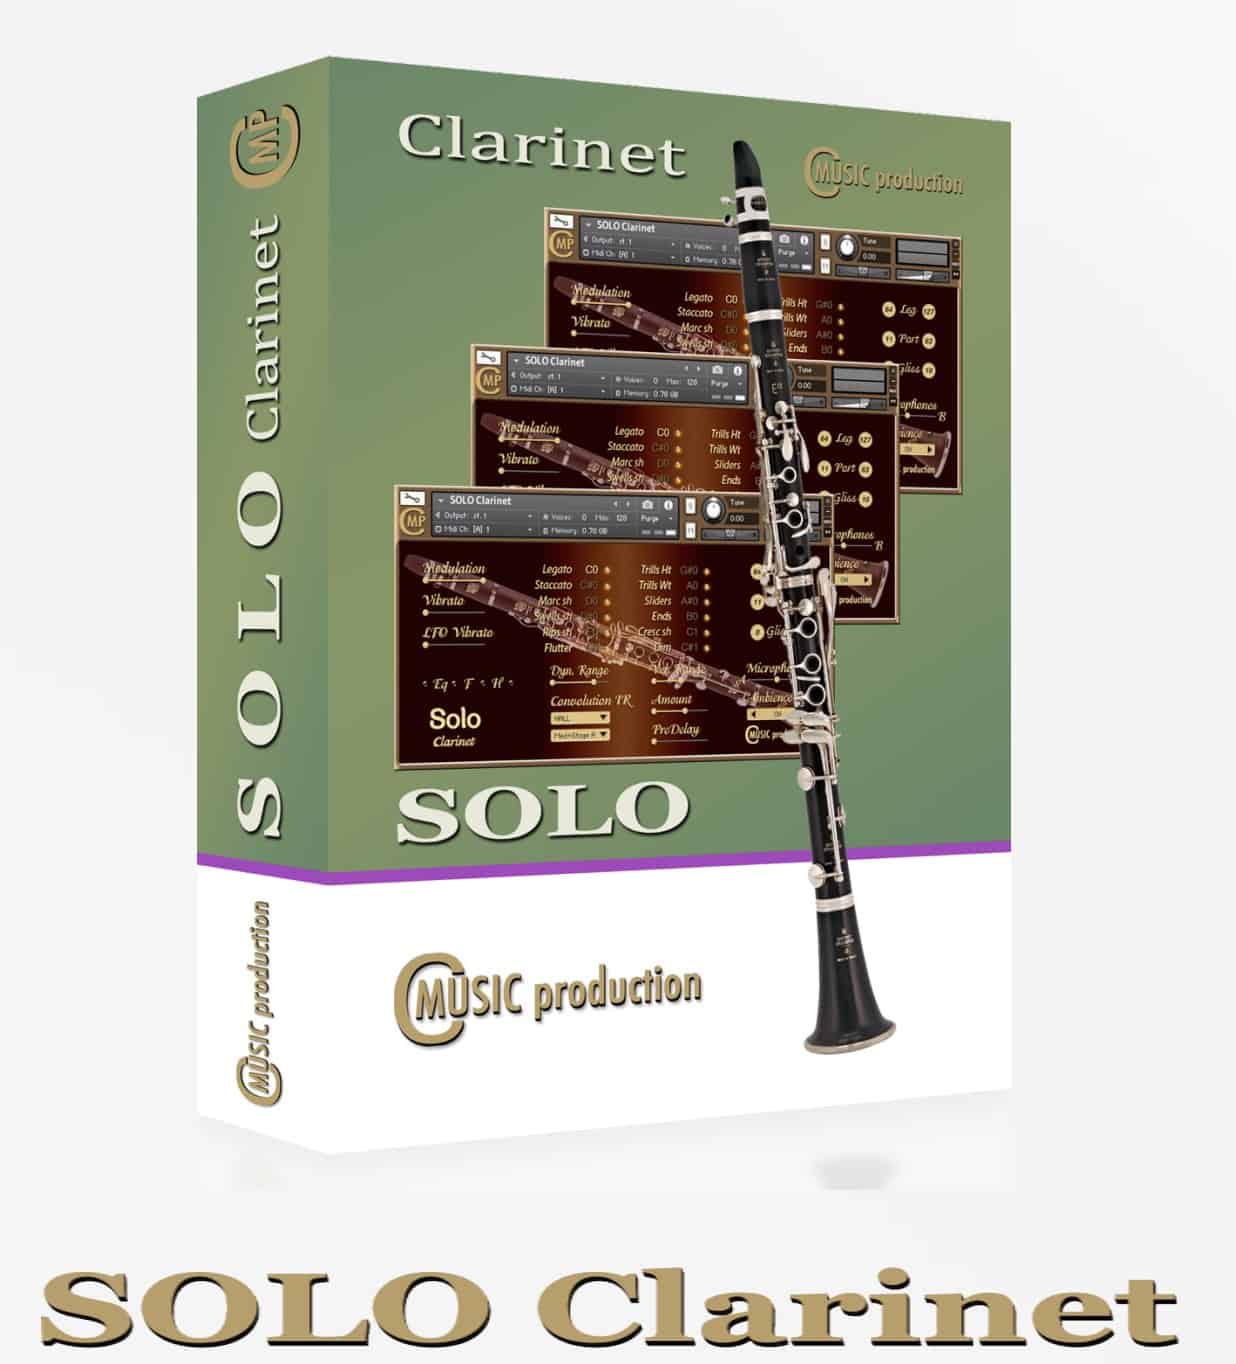 SOLO Clarinet by Cmusic Production